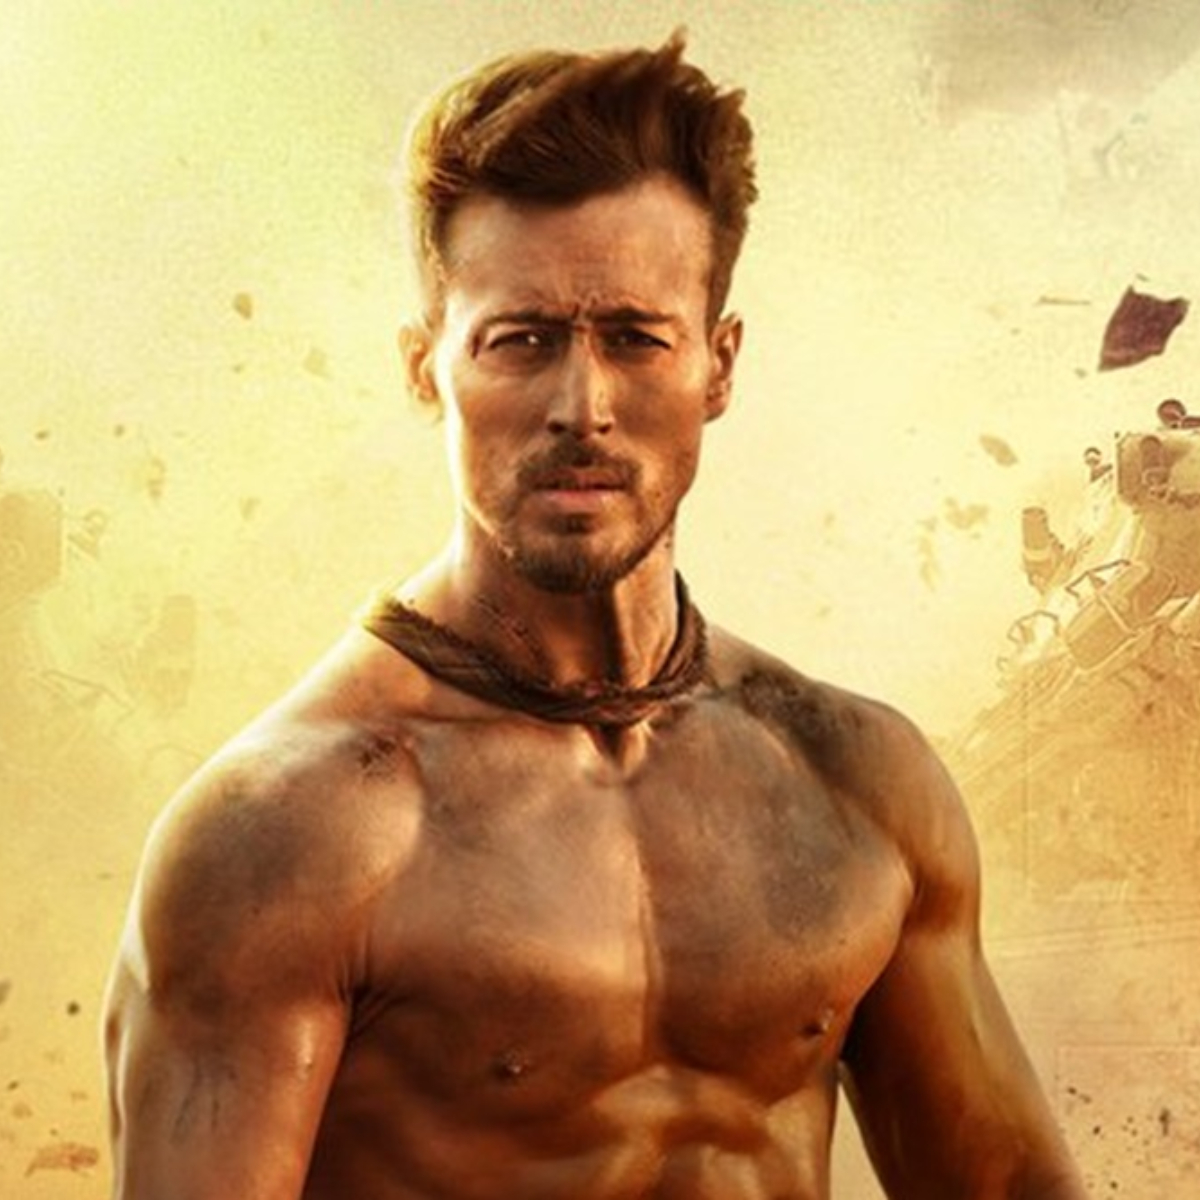 Baaghi 3 Movie Review: Tiger Shroff's muscles and action couldn't salvage the illogical drama